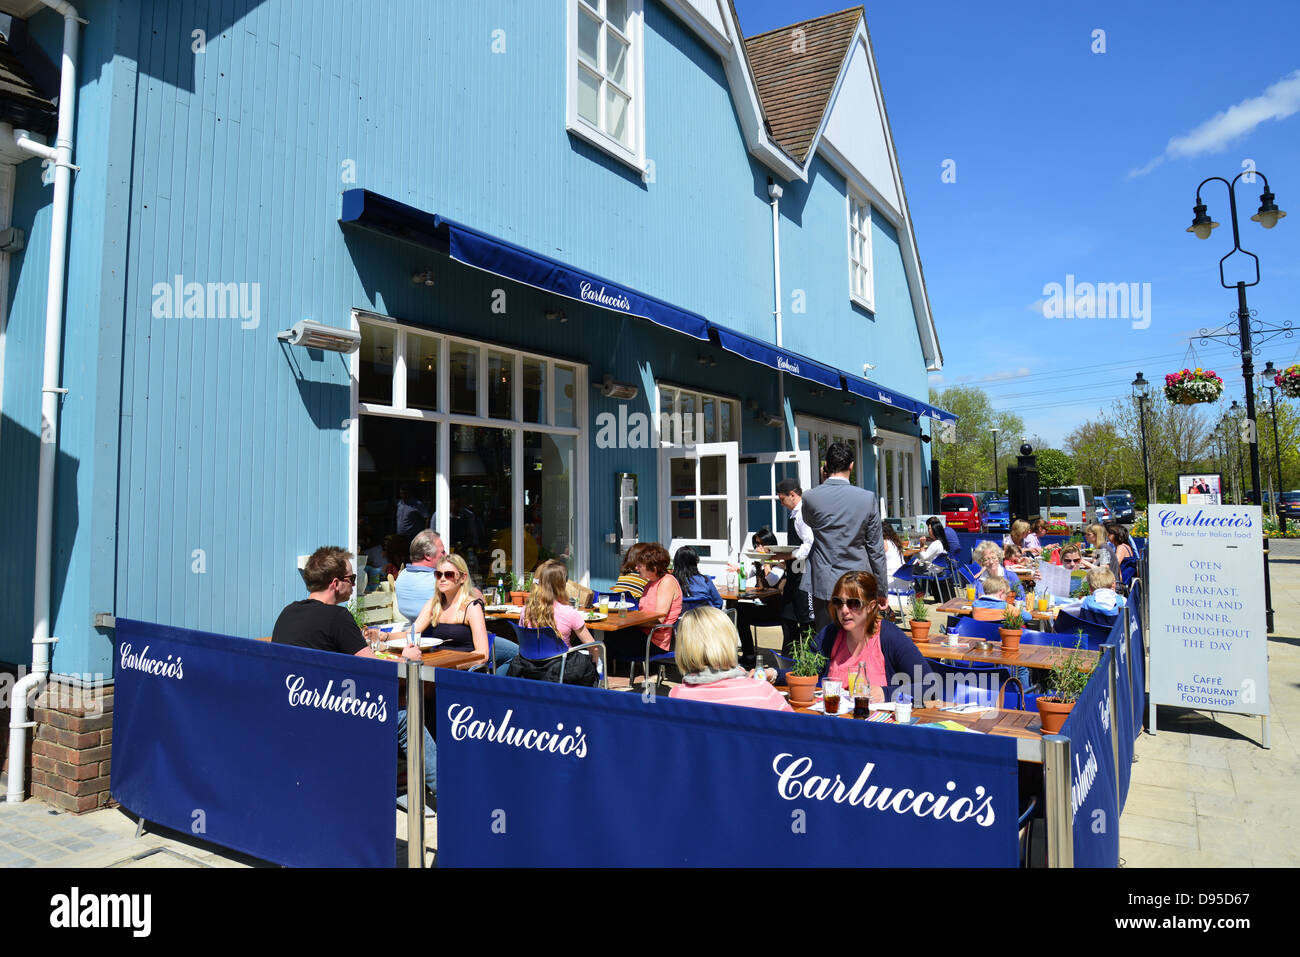 Carluccio's Restaurant at Bicester Village Outlet Shopping Centre, Bicester, Oxfordshire, England, United Kingdom Stock Photo